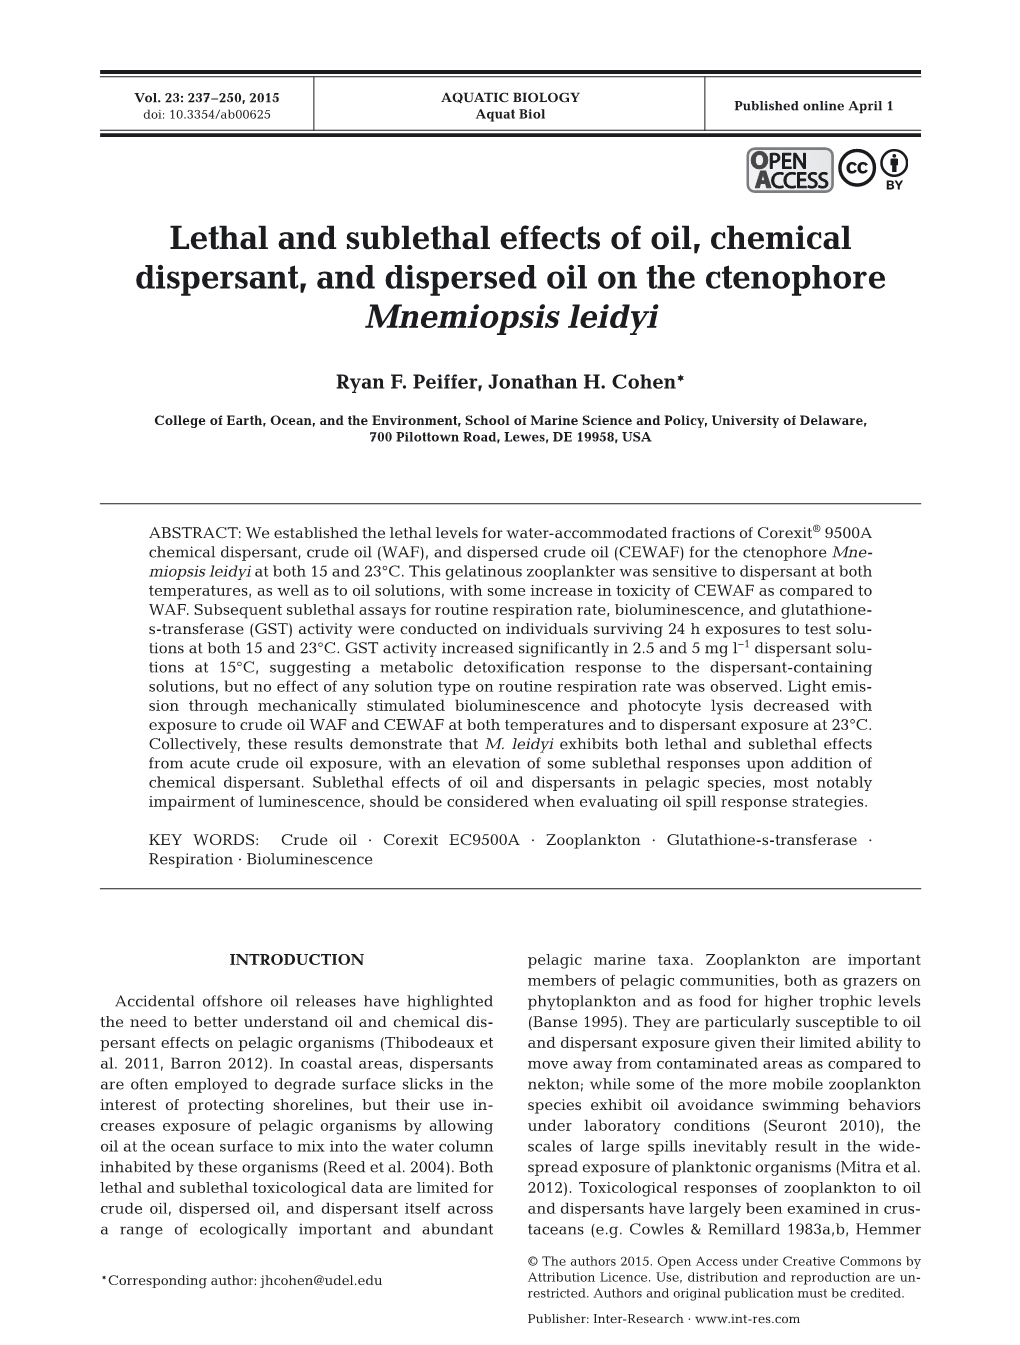 Lethal and Sublethal Effects of Oil, Chemical Dispersant, and Dispersed Oil on the Ctenophore Mnemiopsis Leidyi